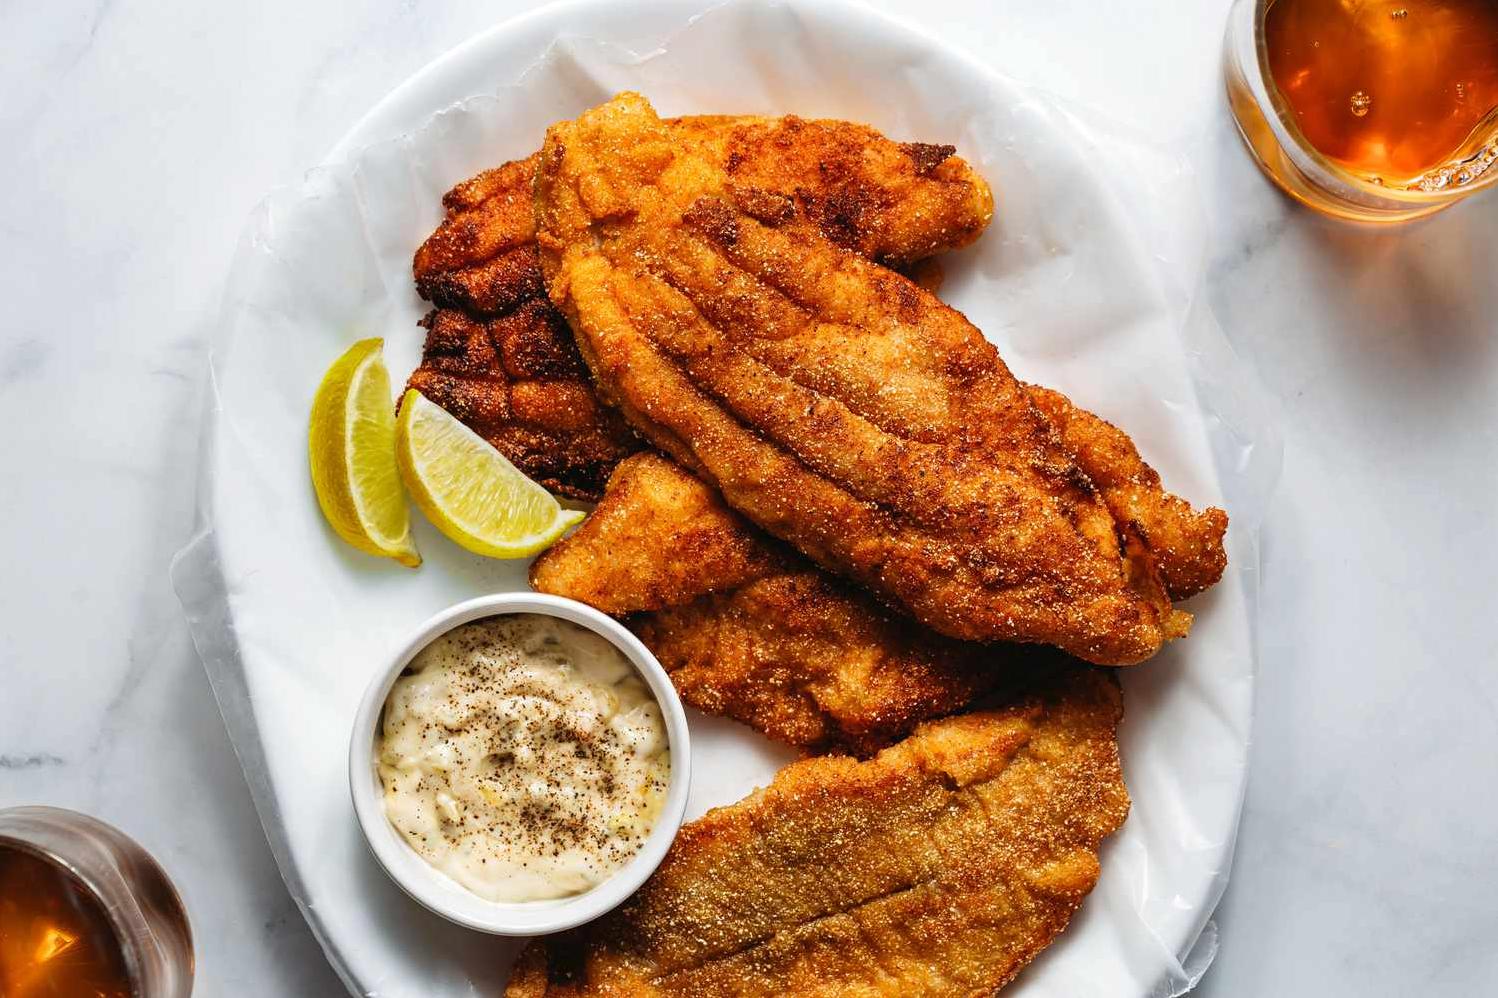  The crust on our catfish should be golden brown and super crispy